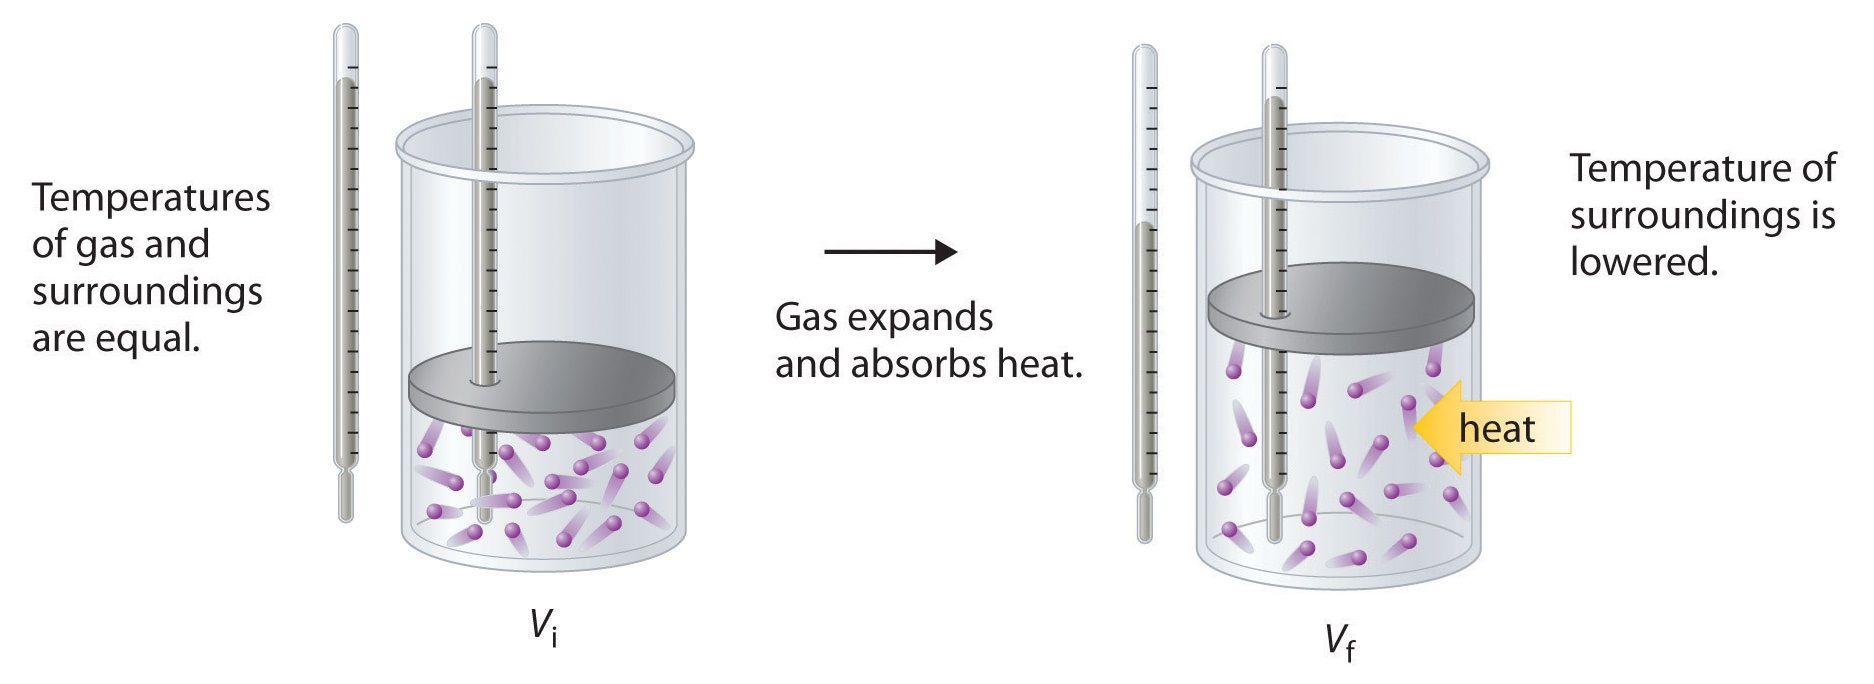 Temperatures of gas and surroundings are equal. Then the gas expands and absorbs heat. Temperature of the surroundings is then lowered. 